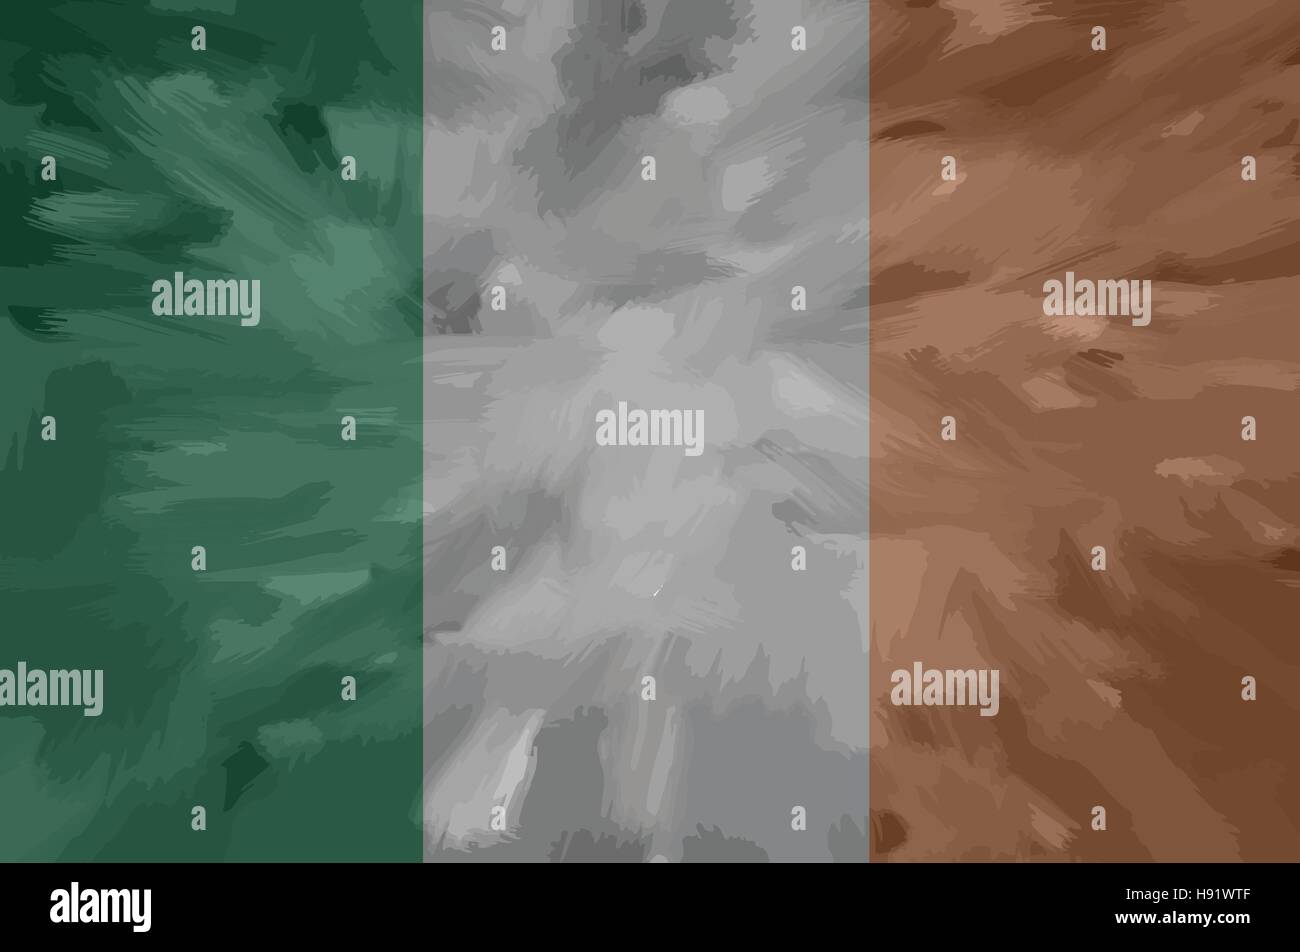 Ireland painted / drawn vector flag. Dramatic, unusual look. Vector file contains flag and texture layers Stock Vector